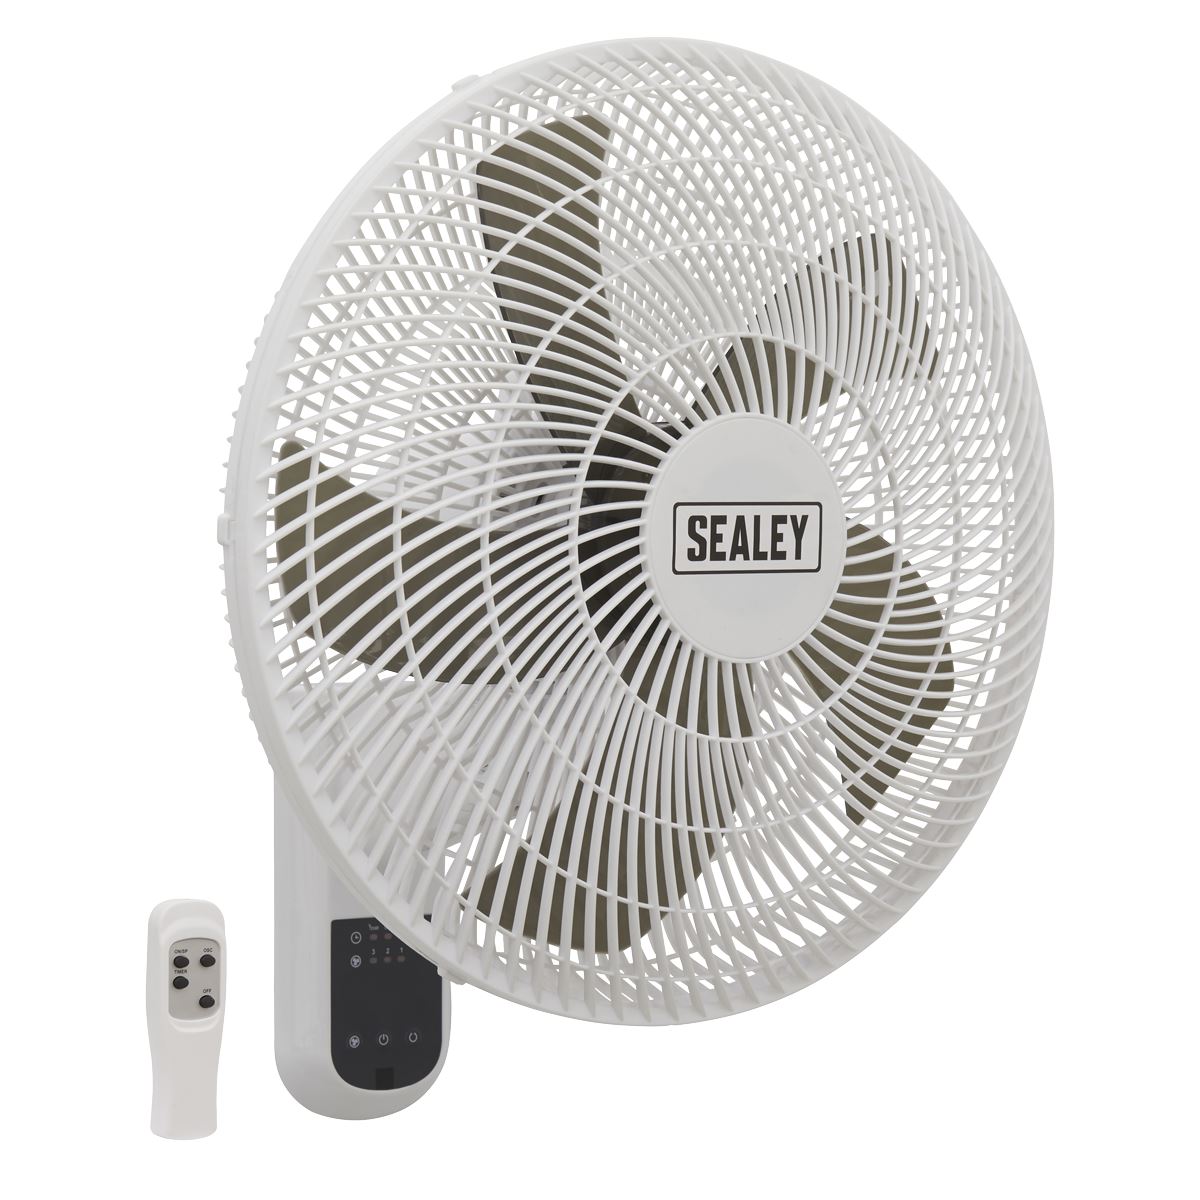 Sealey Wall Fan Remote Control 18" 3-Speed 230V Air Cooler